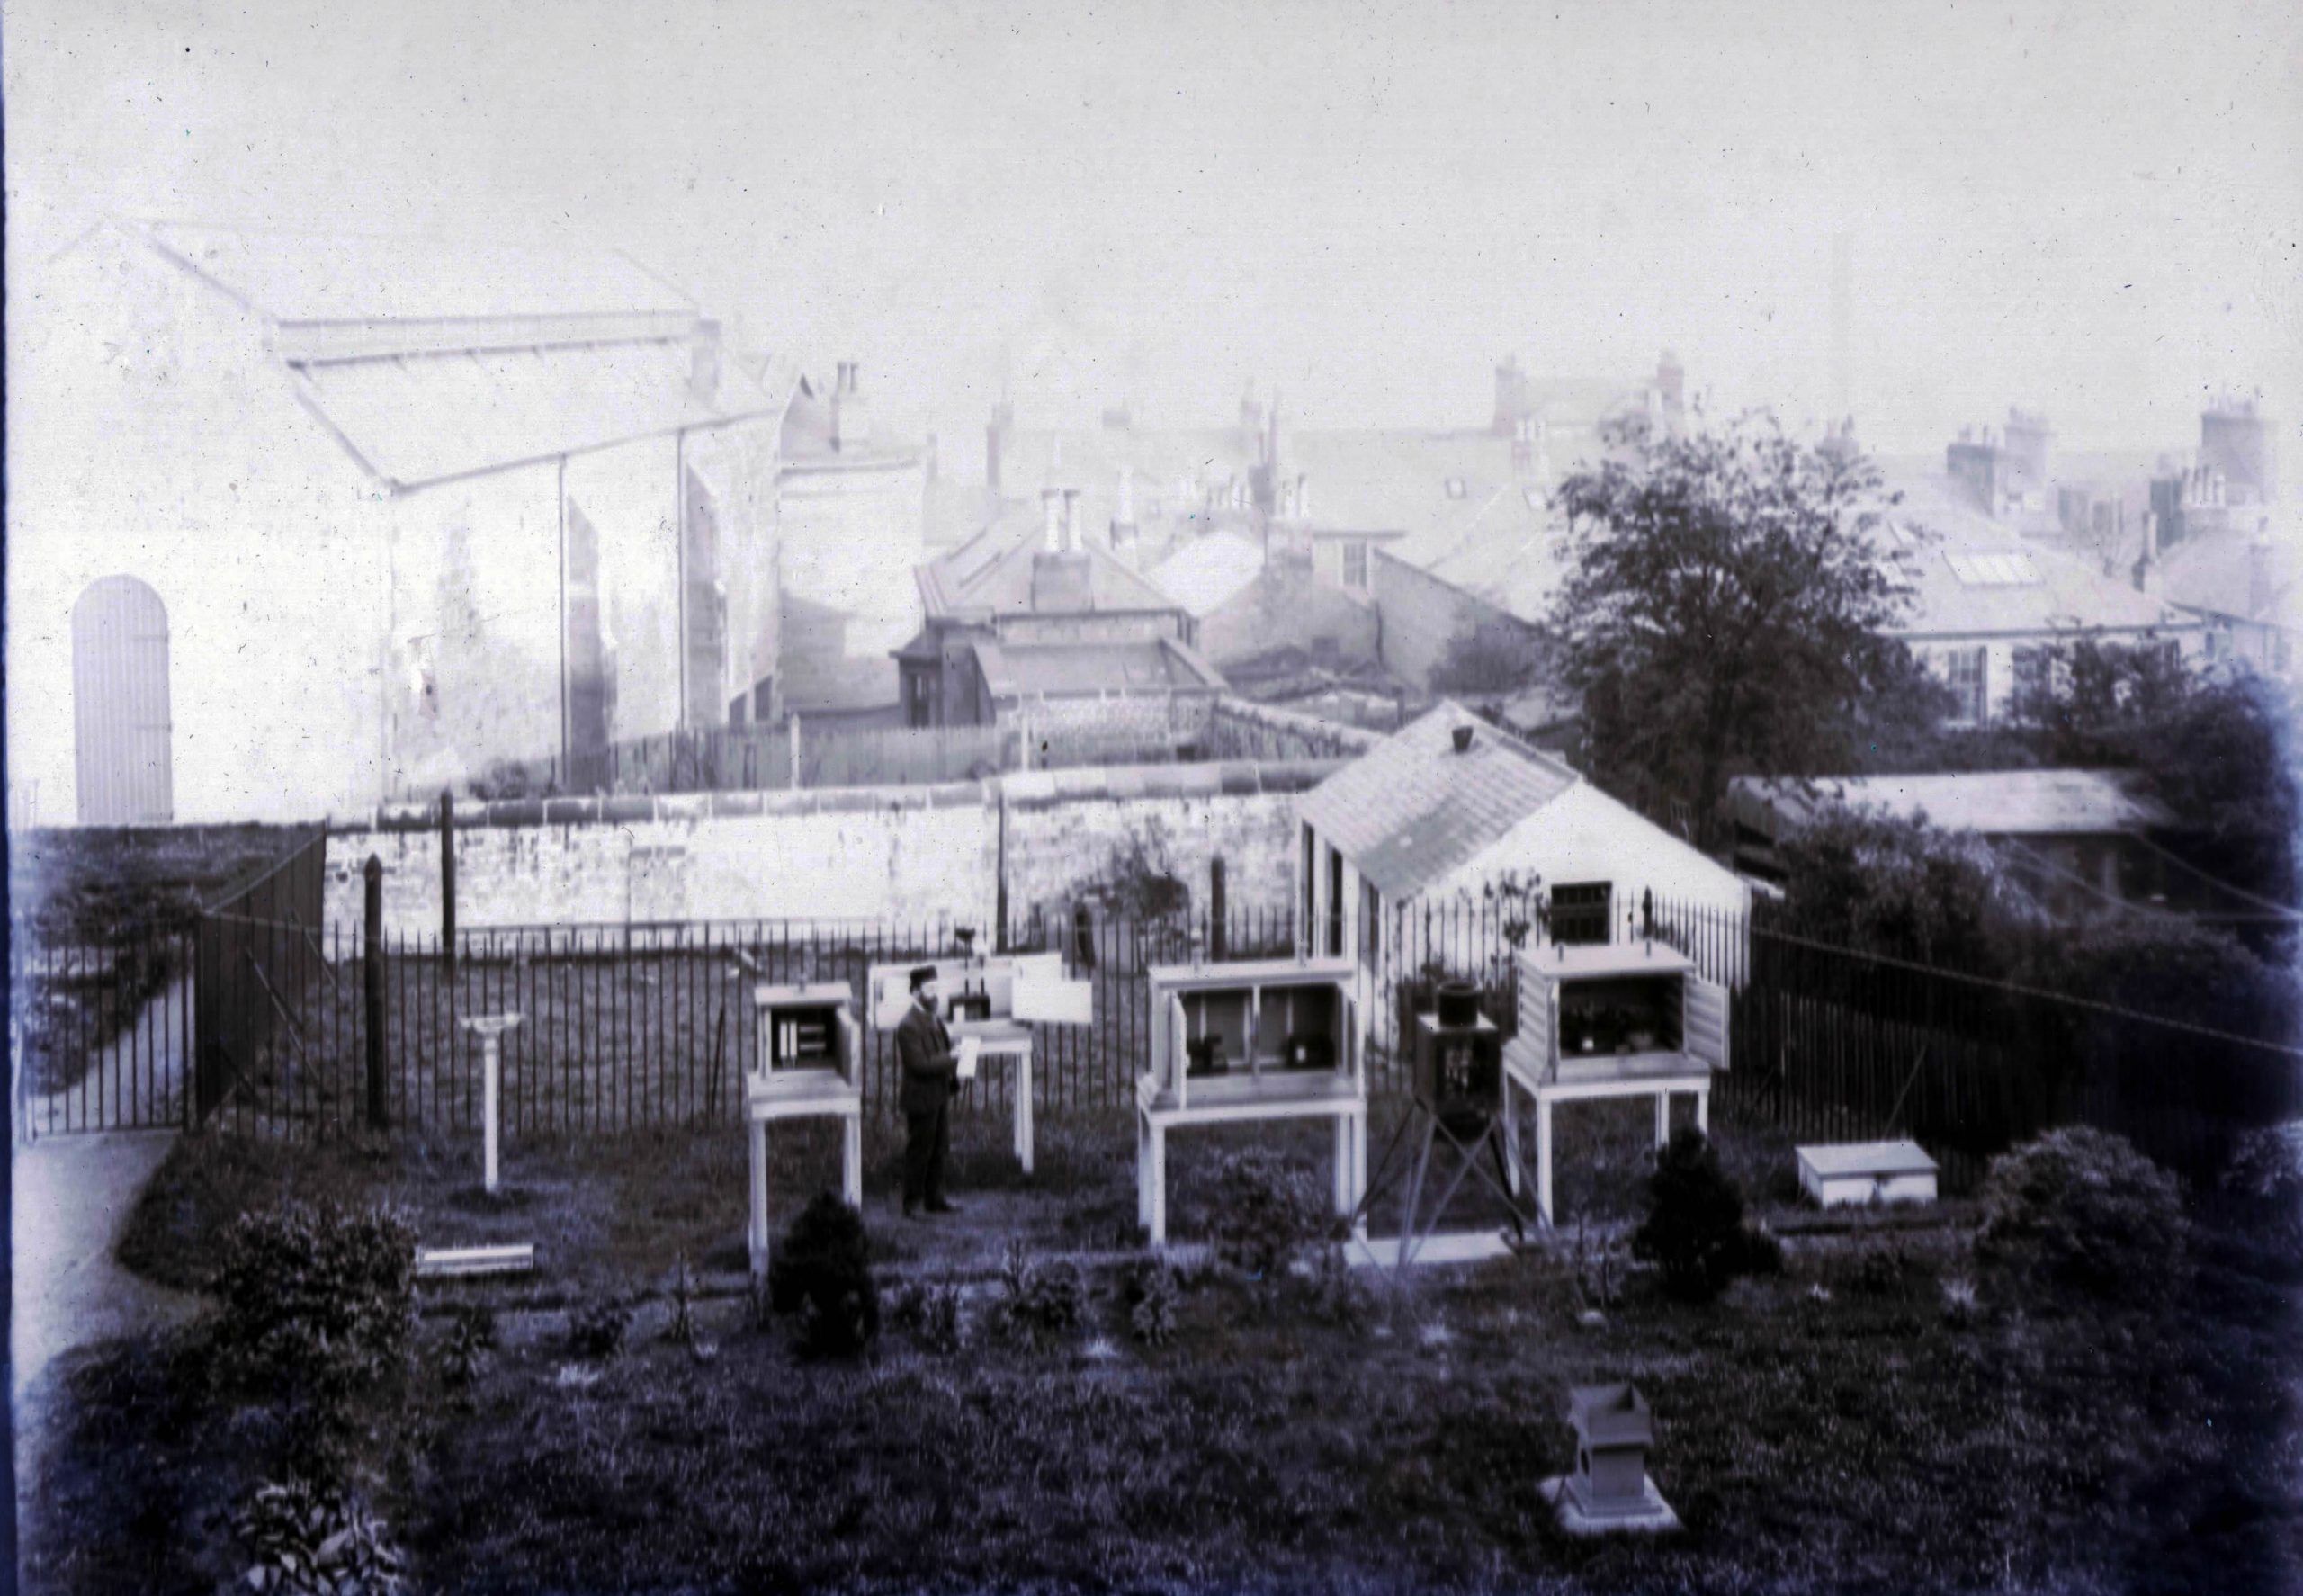 Man doing weather experiments with scientific instruments in Coats Observatory grounds, 19th Century